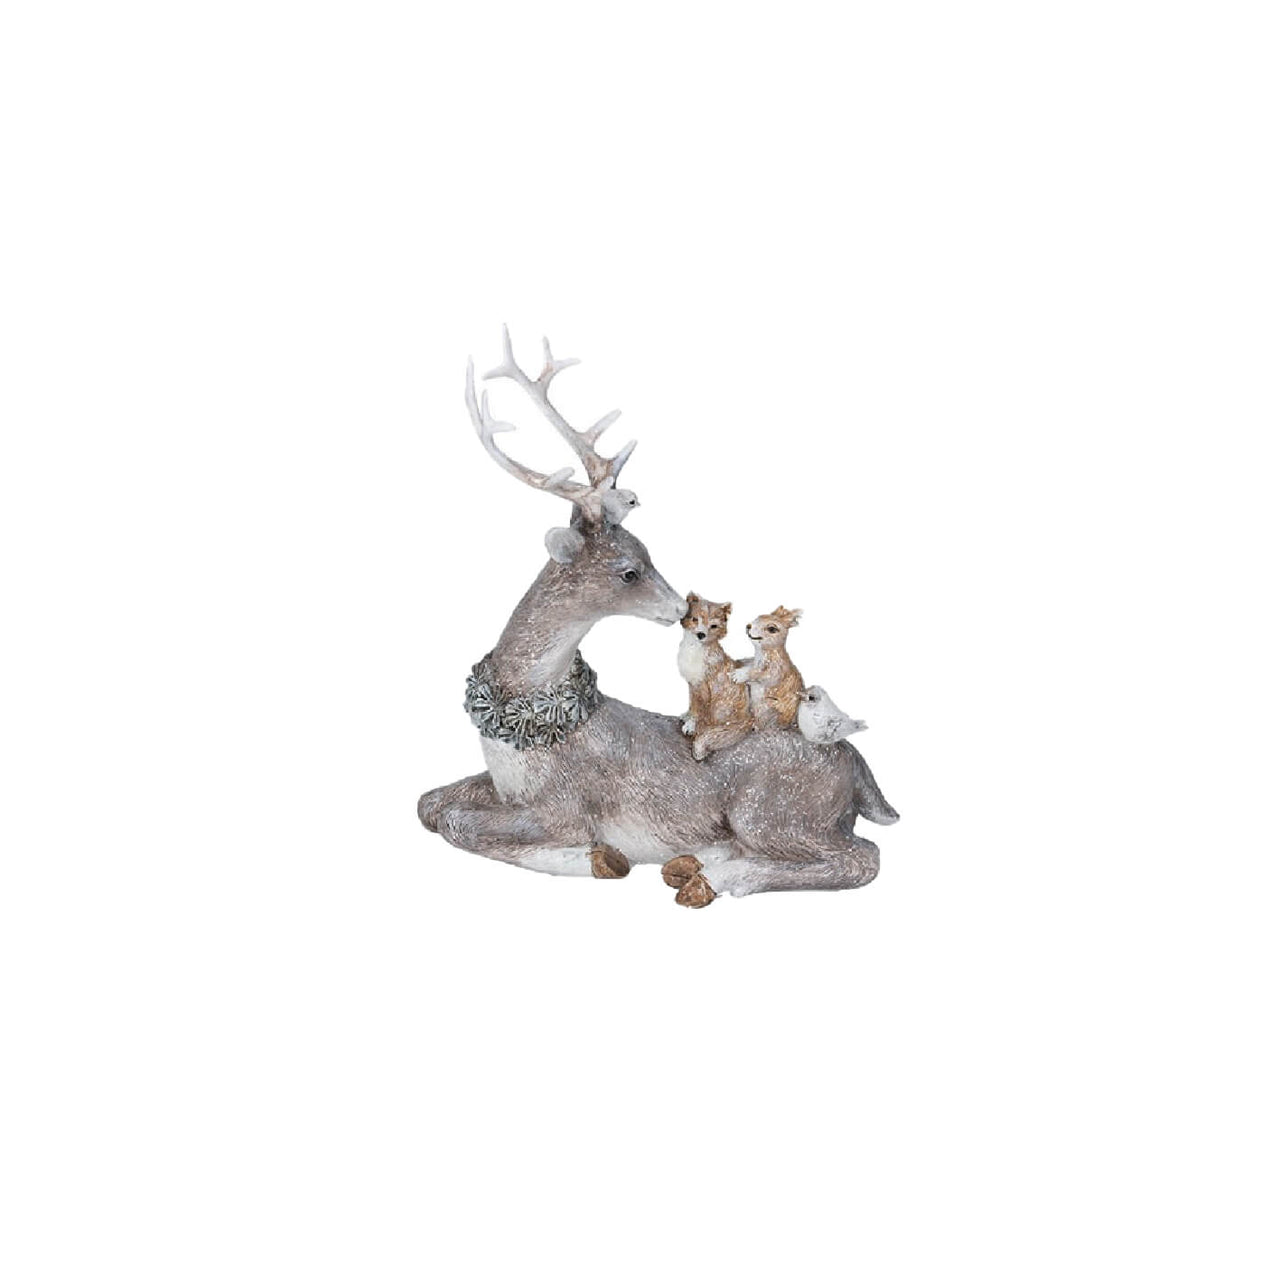 Stag and Woodland Christmas Ornament